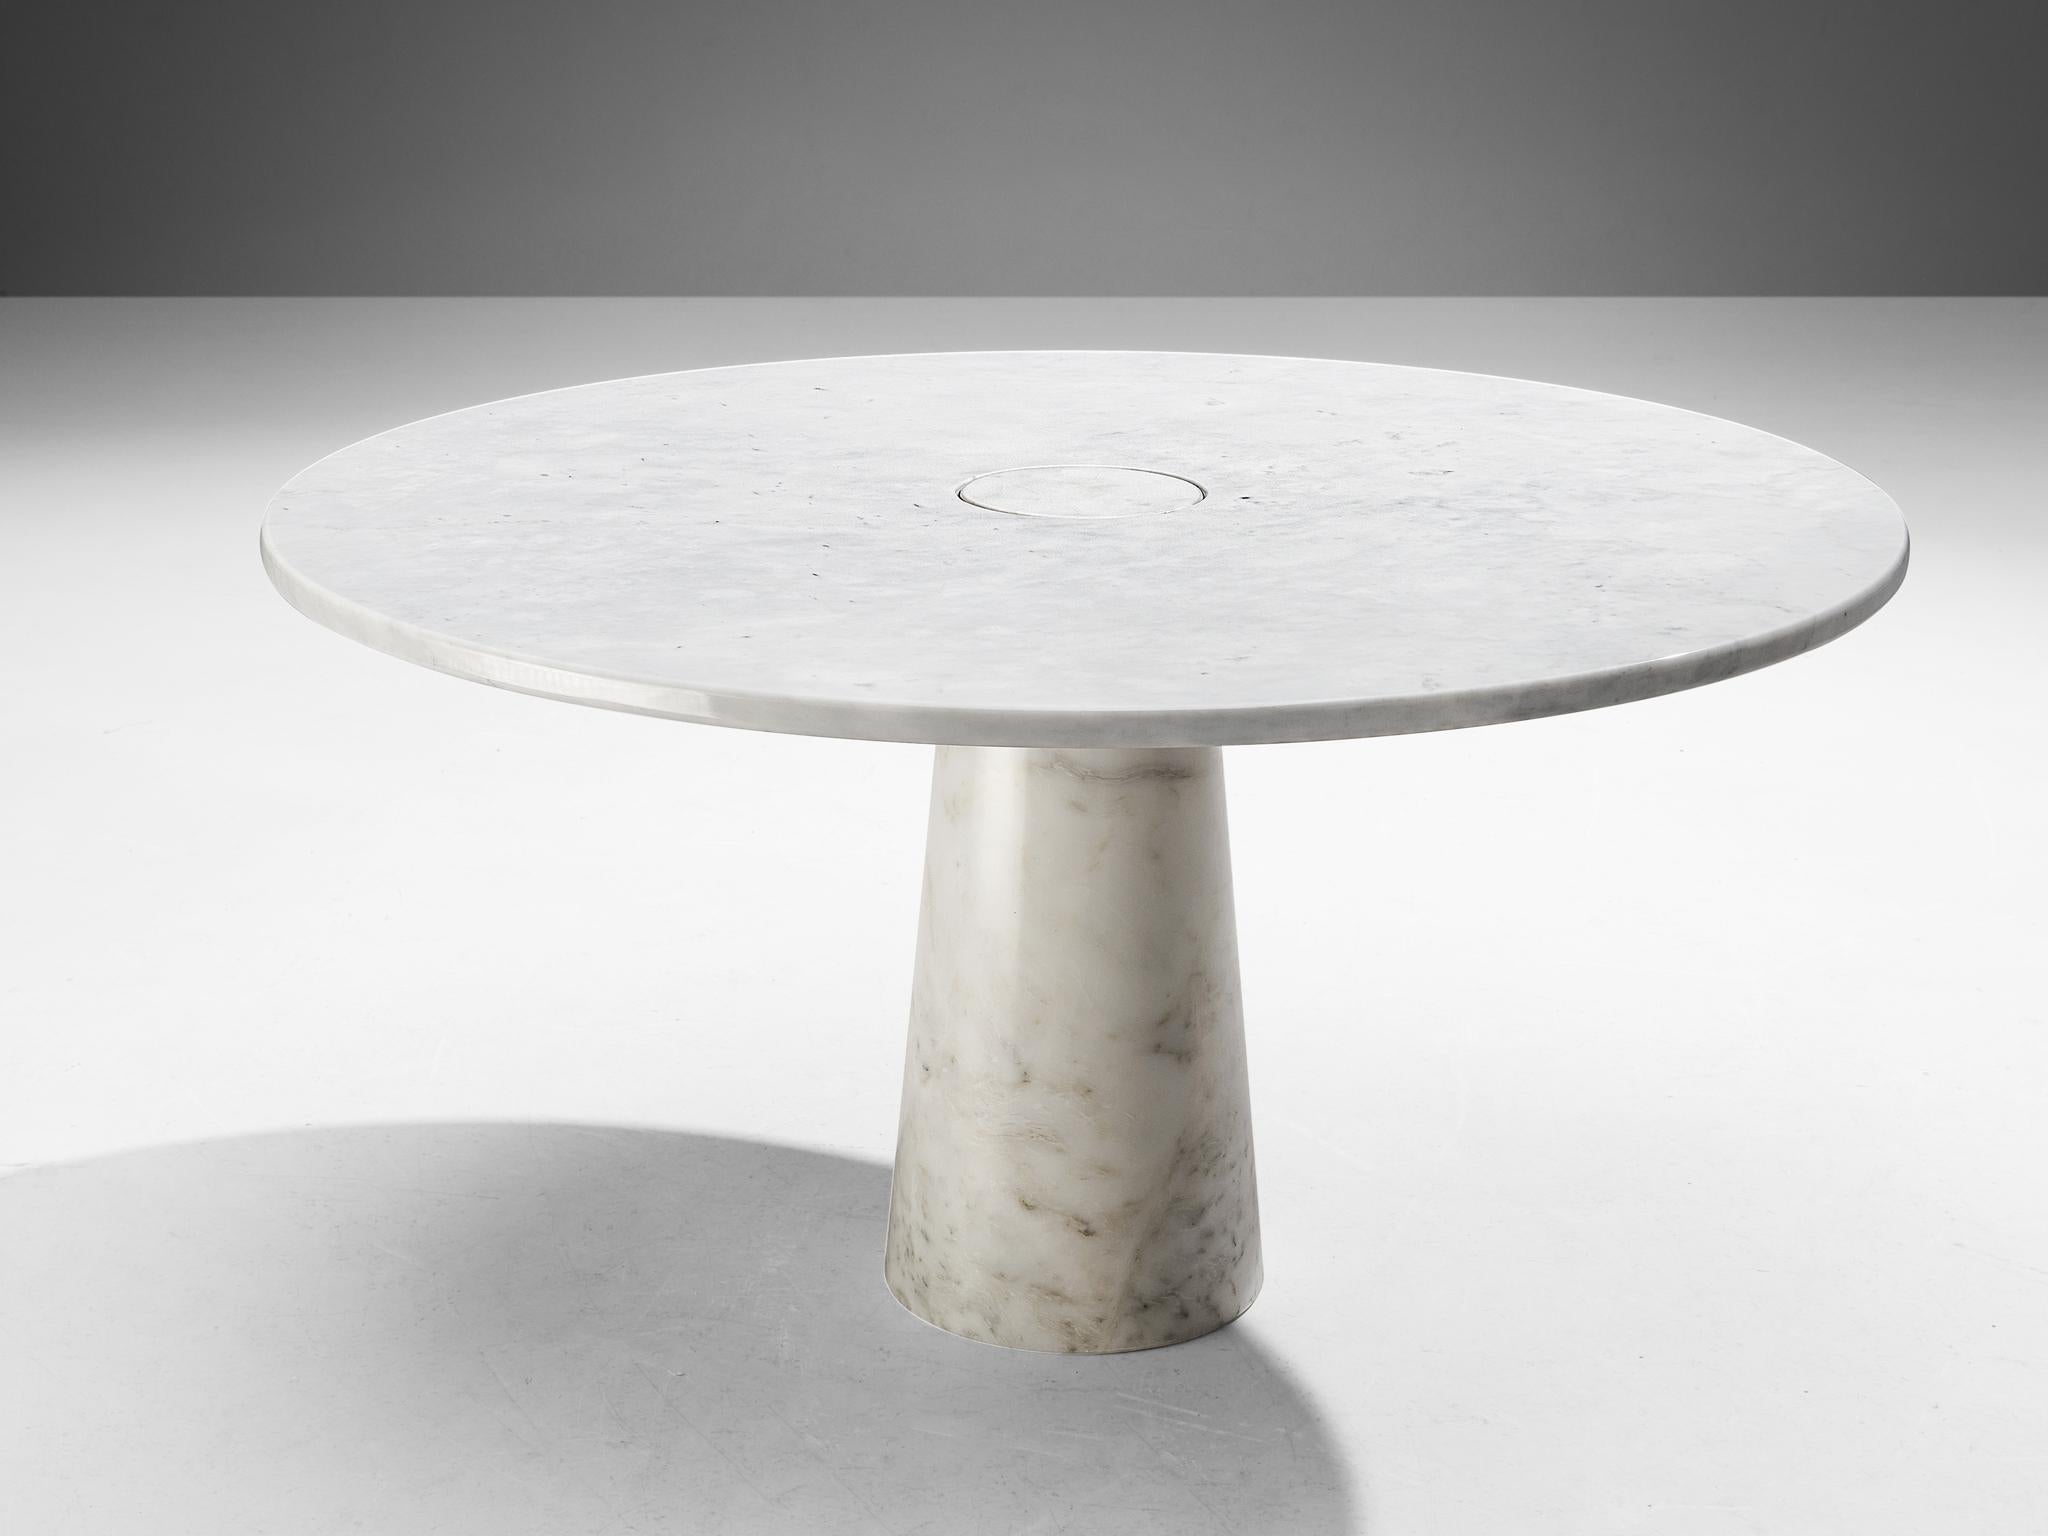 Angelo Mangiarotti for Skipper, dining table ‘Eros’, white marble, 1970s

This sculptural table by Angelo Mangiarotti is a skilful example of postmodern design. The table is executed in white marble. The round tabletop features no joints or clamps